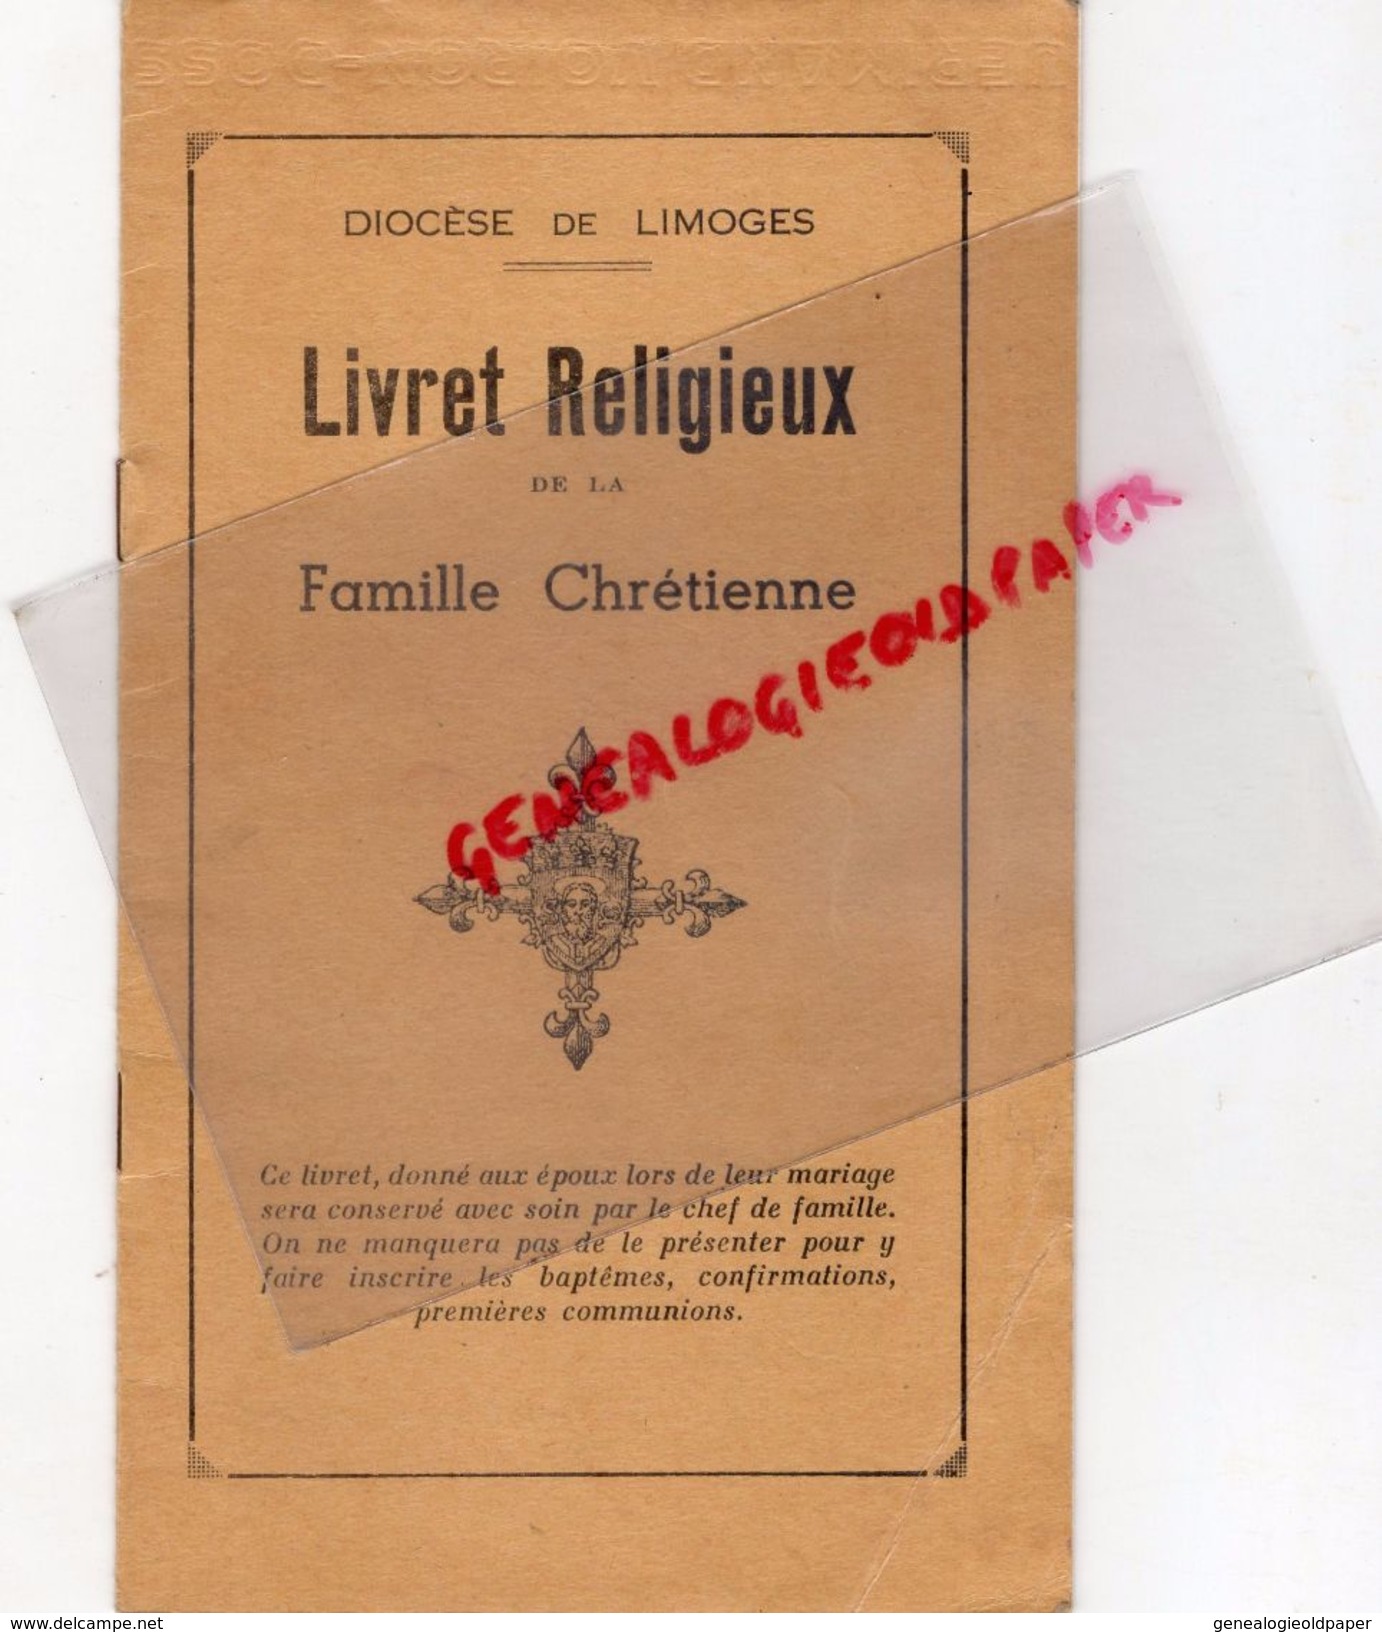 87 - BESSINES- LIVRET RELIGIEUX FAMILLE CHRETIENNE DIOCESE LIMOGES- RENE ALFRED CHATENET-GREMAINE TEXIER- 1943 - Historical Documents